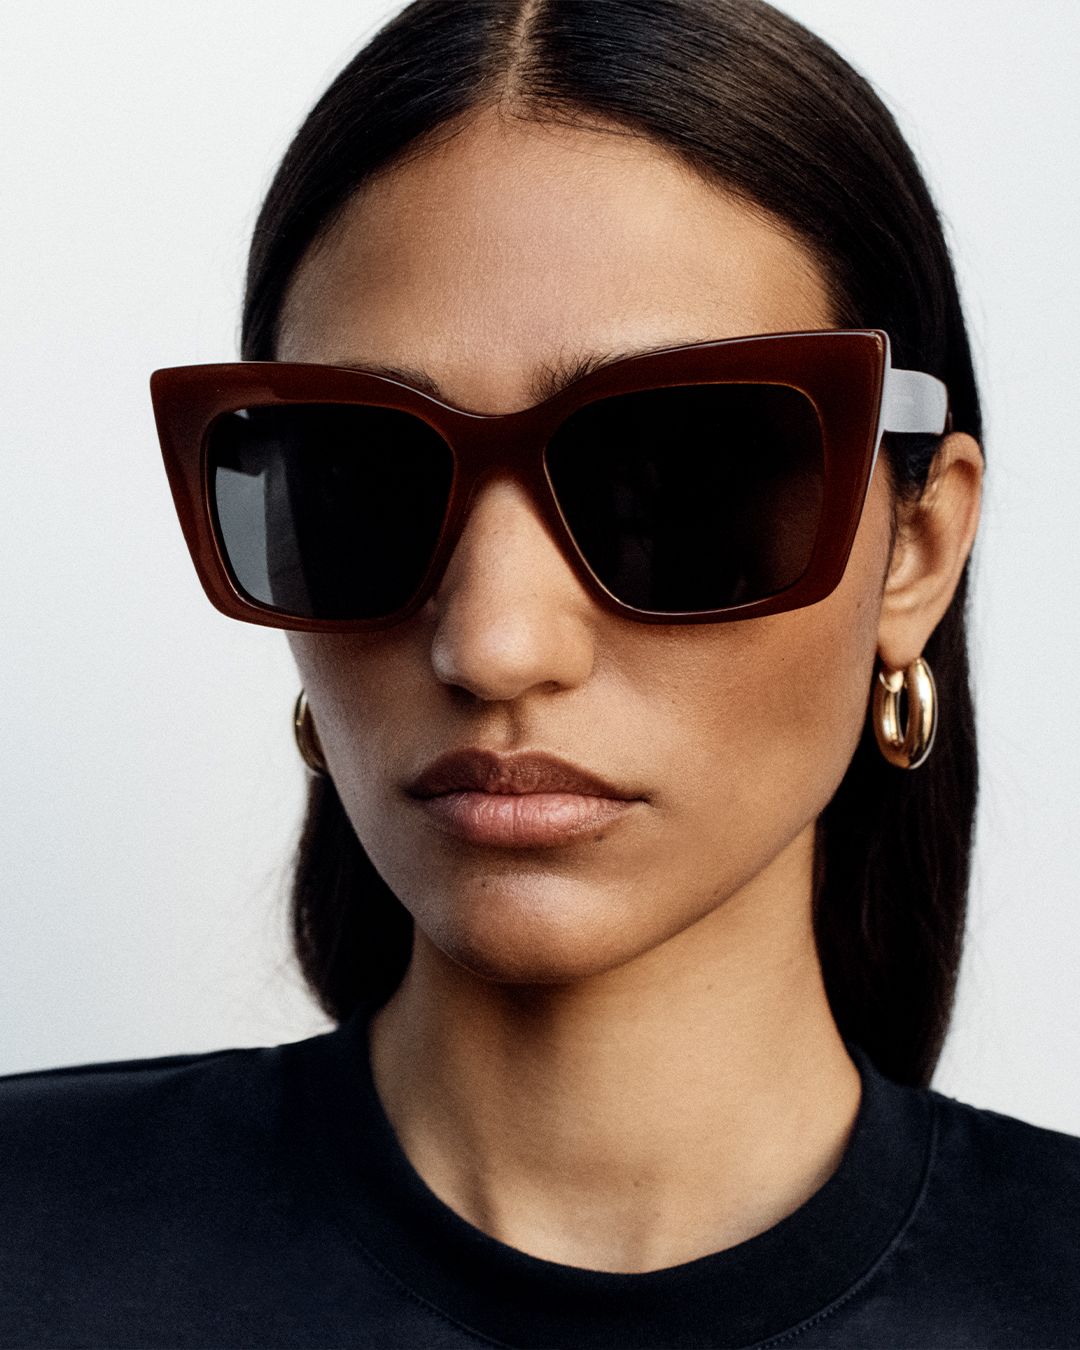 Model facing the camera wearing brown oversized sunglasses and gold hoop earrings